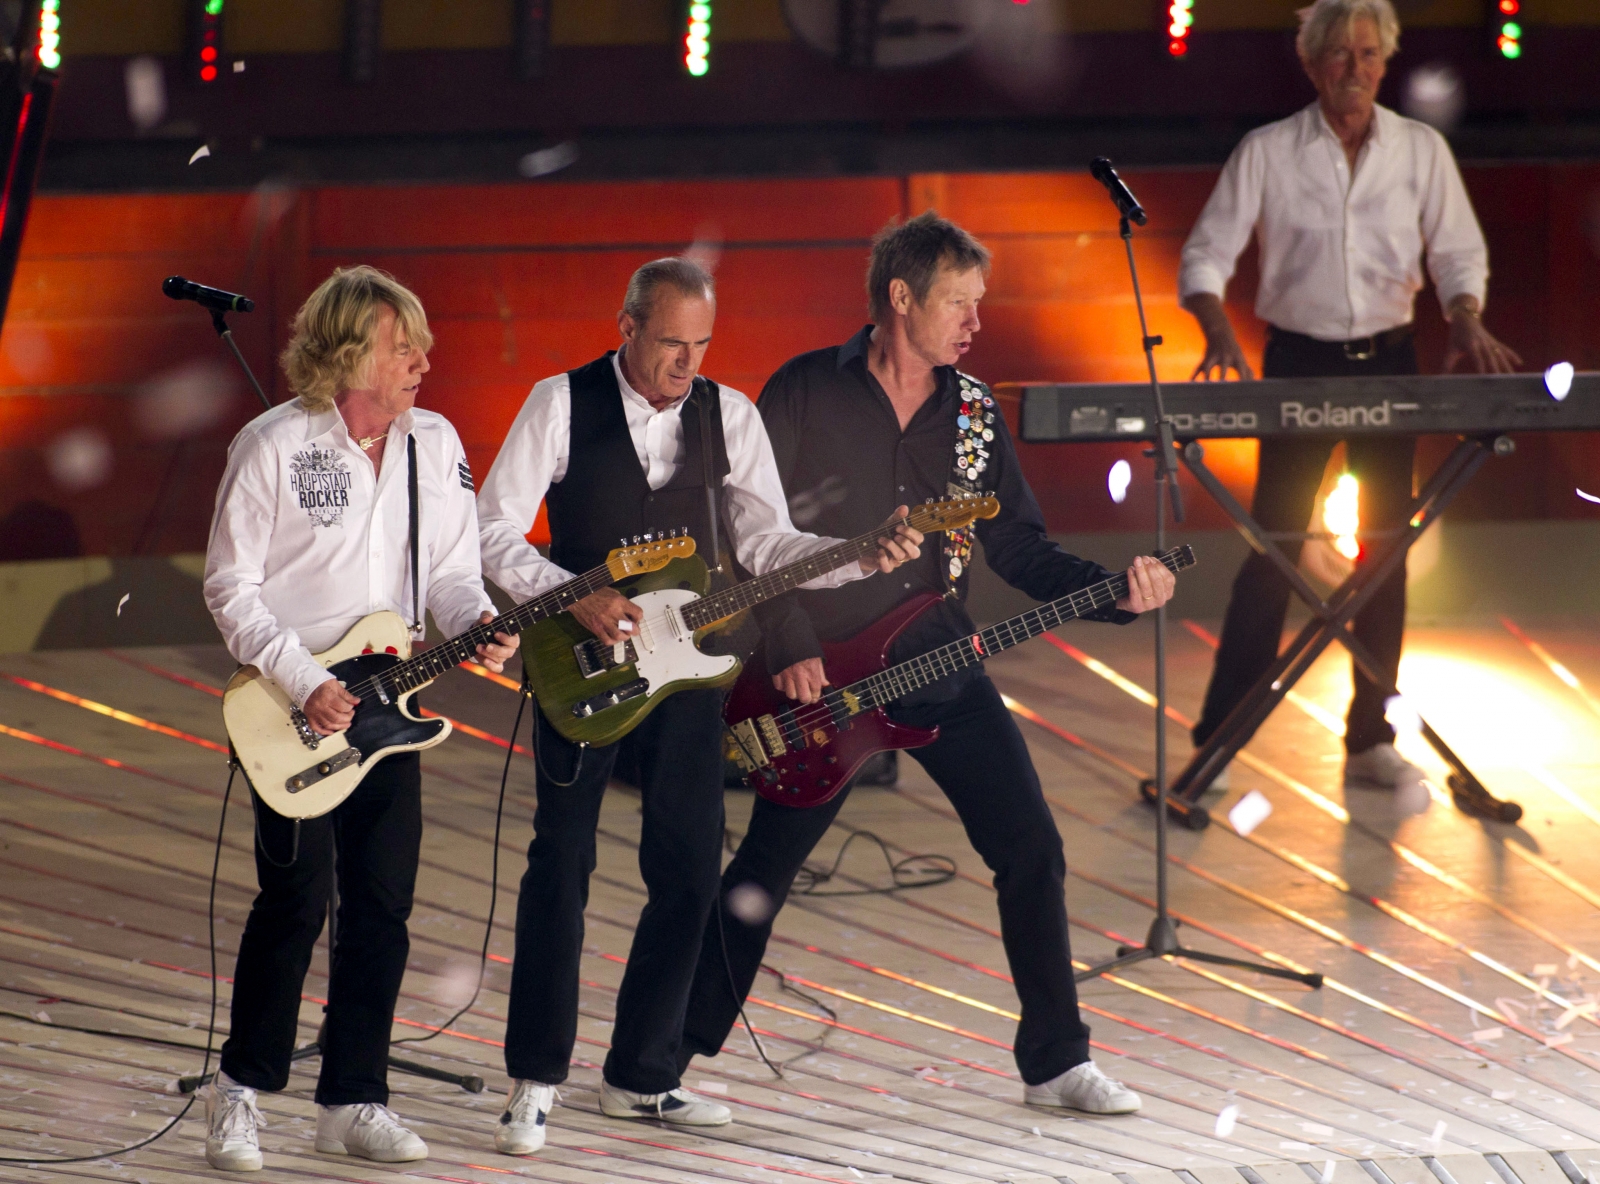 Status Quo tour How to buy tickets for band's first shows after Rick